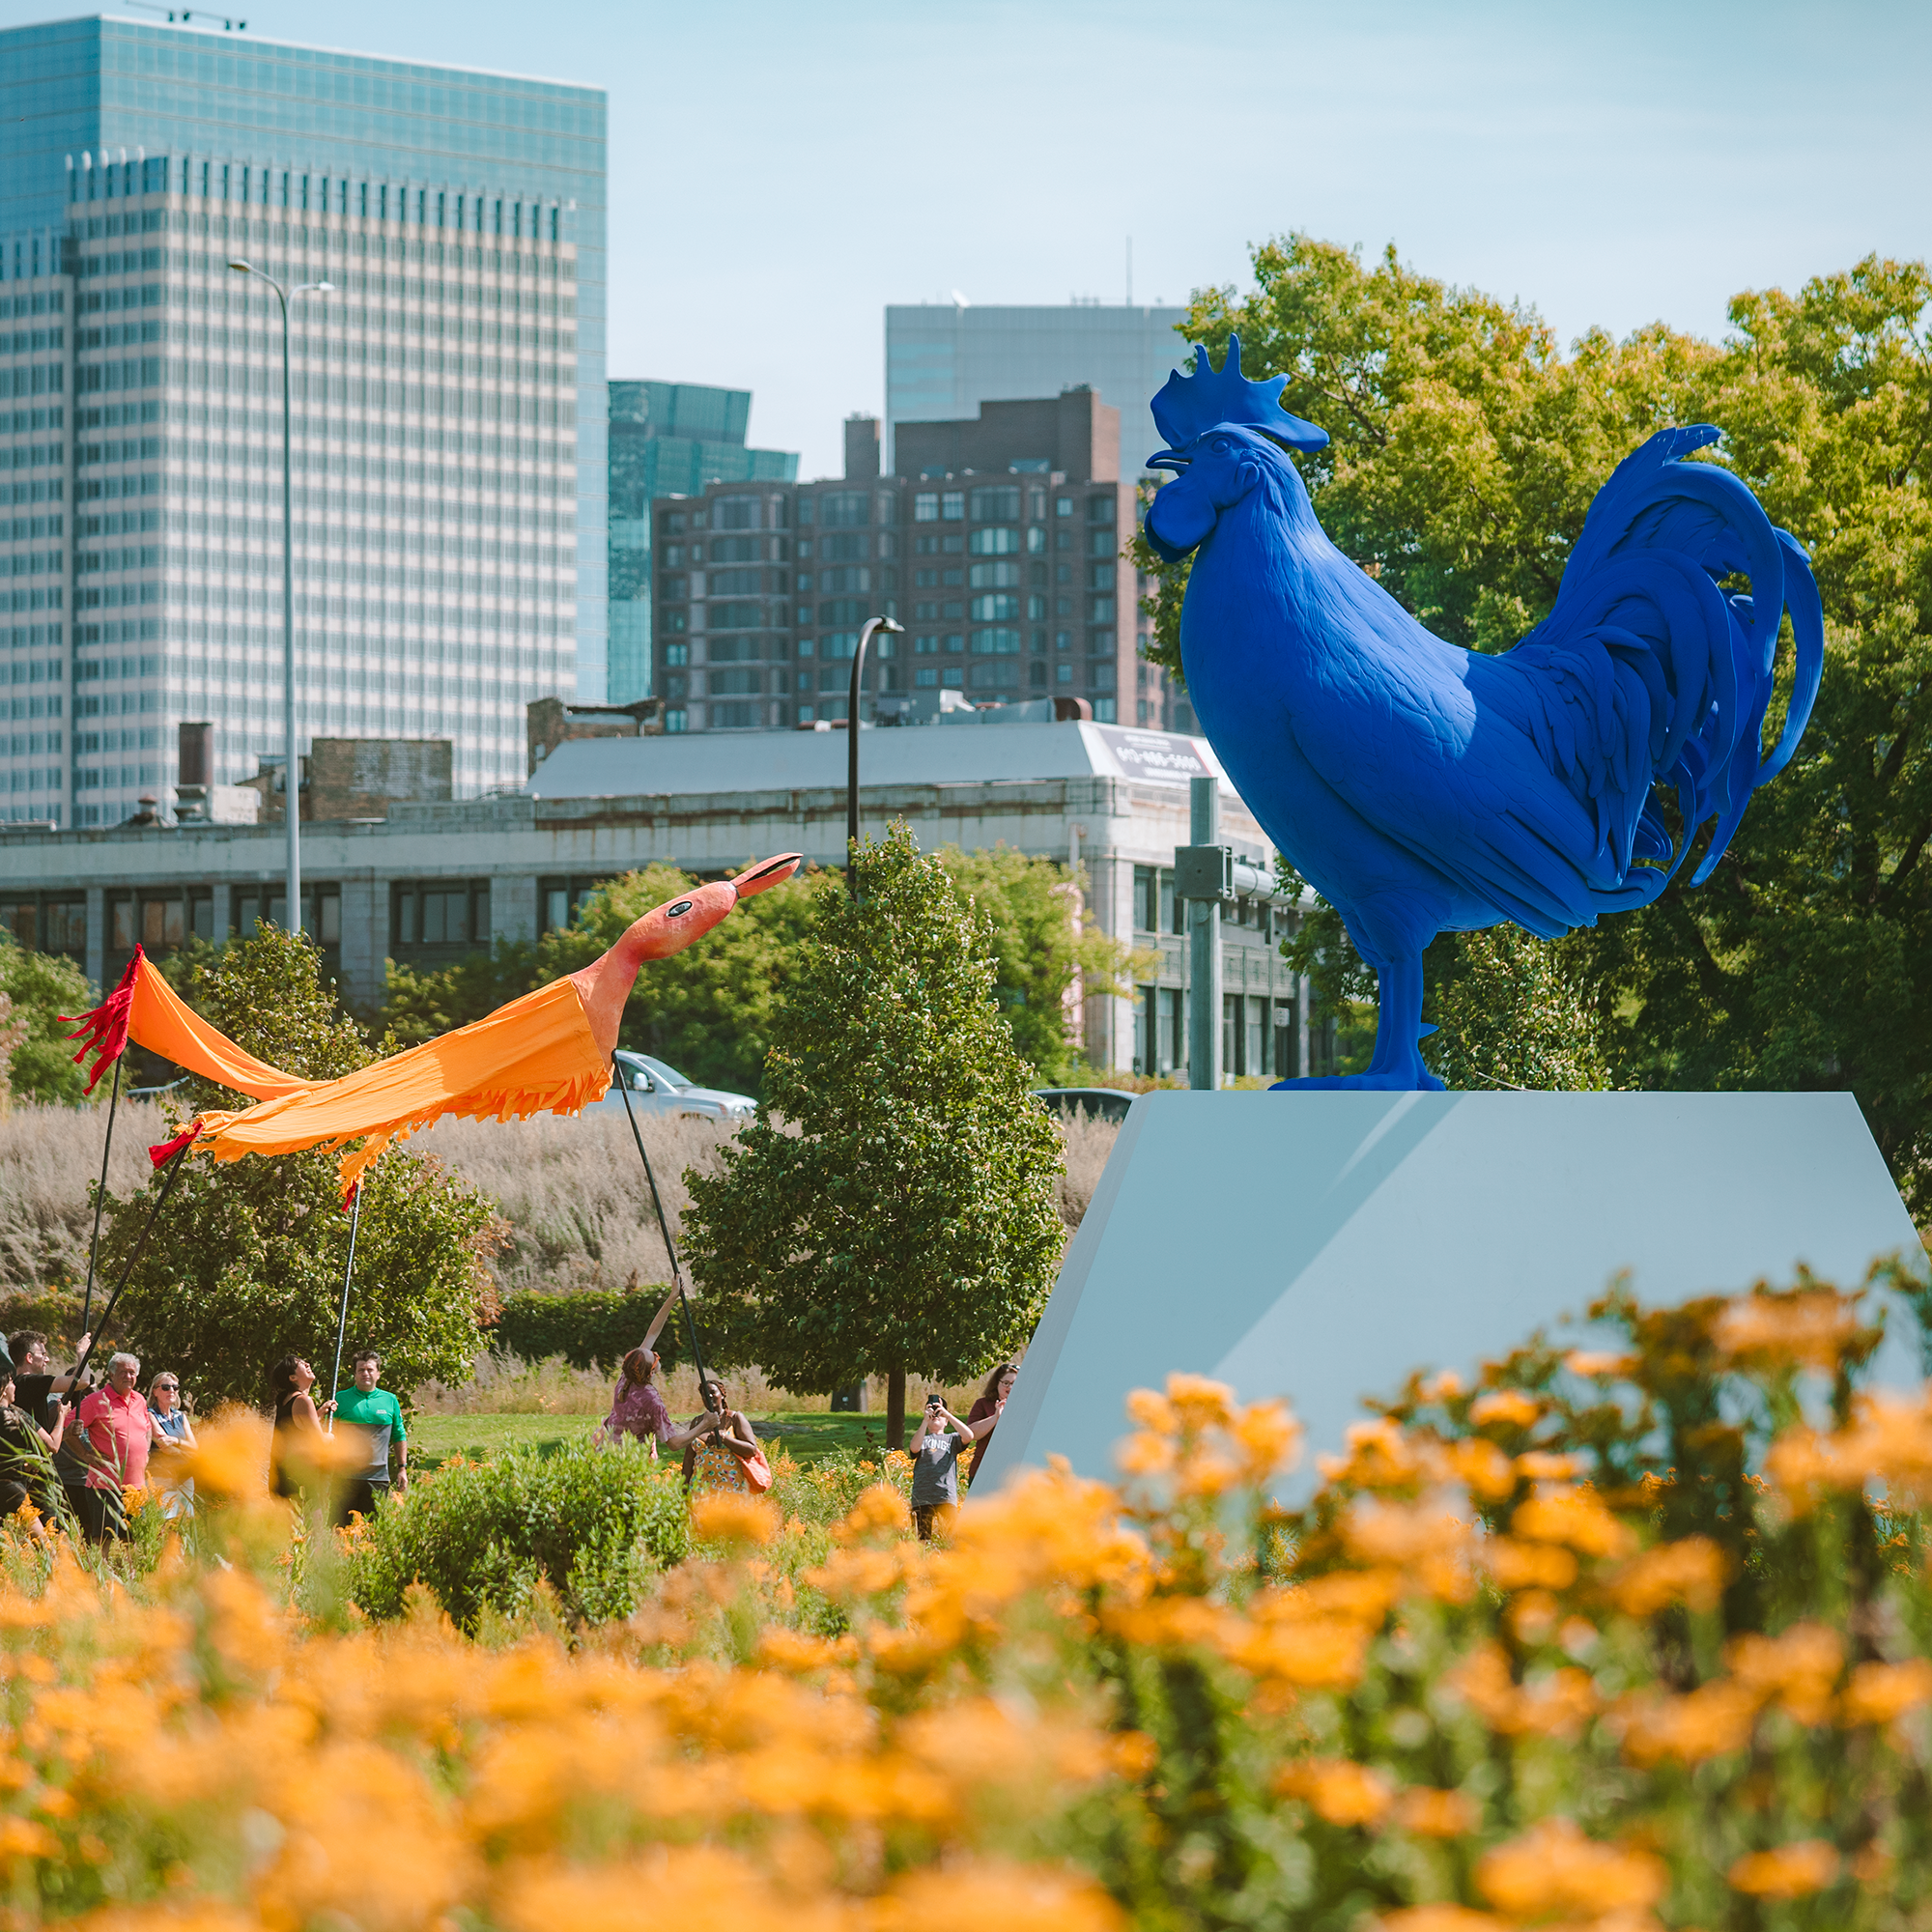 The Minneapolis Sculpture Garden at the Walker Art Center draws patrons during a fall event. Katharina Fritsch’s large fiberglass and polyester resin rooster, Hahn/Cock, is visible on the right. Photo by Kameron Herndon, courtesy of the Walker Art Center, Minneapolis.